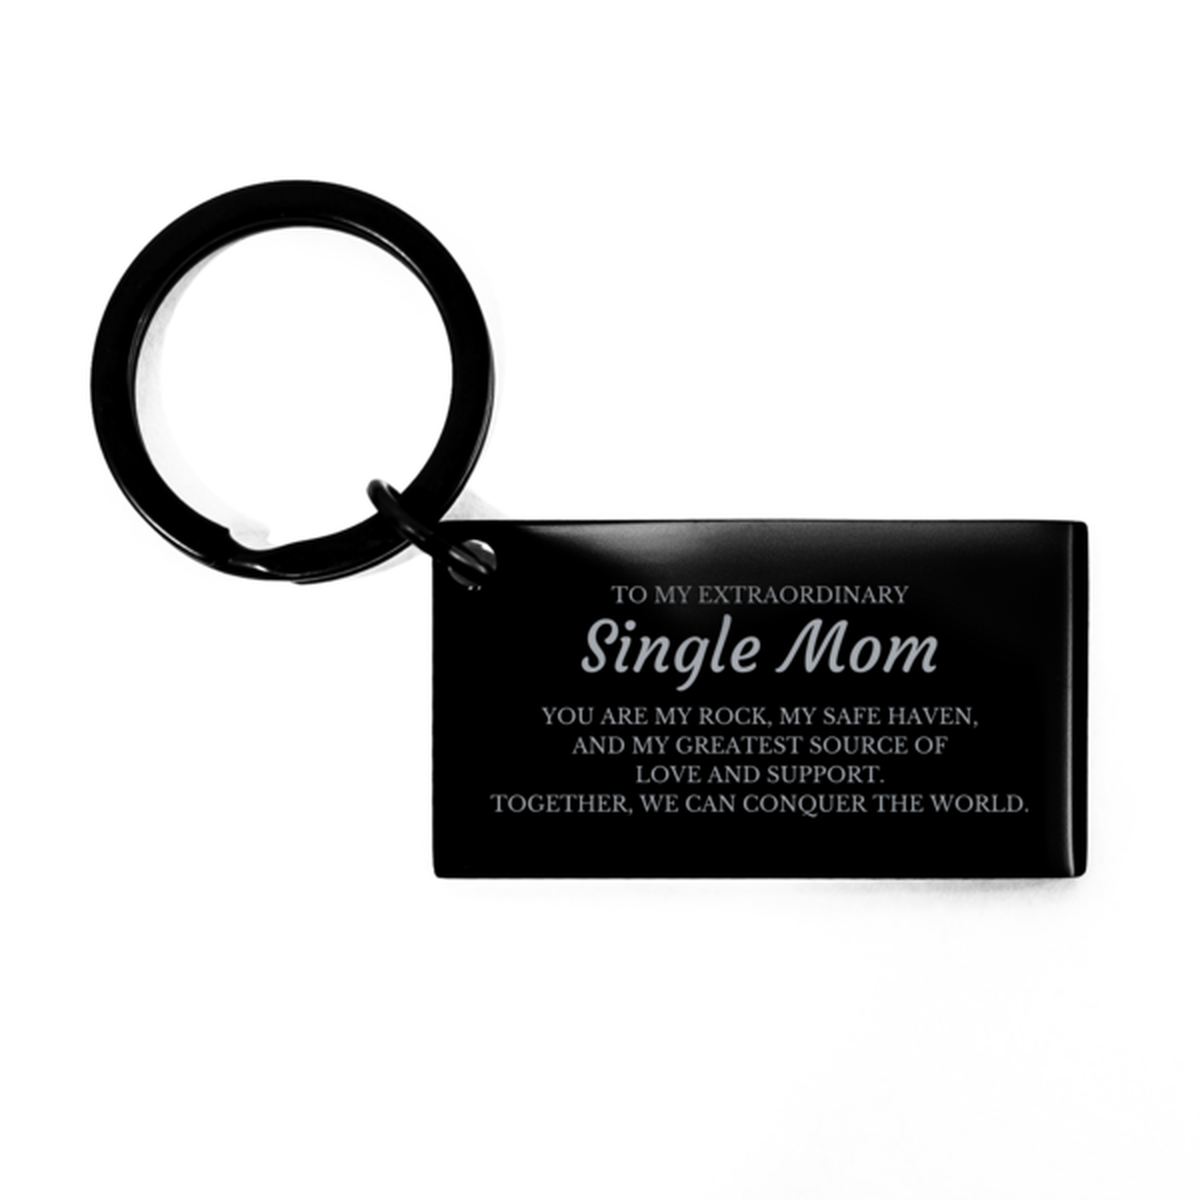 To My Extraordinary Single Mom Gifts, Together, we can conquer the world, Birthday Keychain For Single Mom, Christmas Gifts For Single Mom